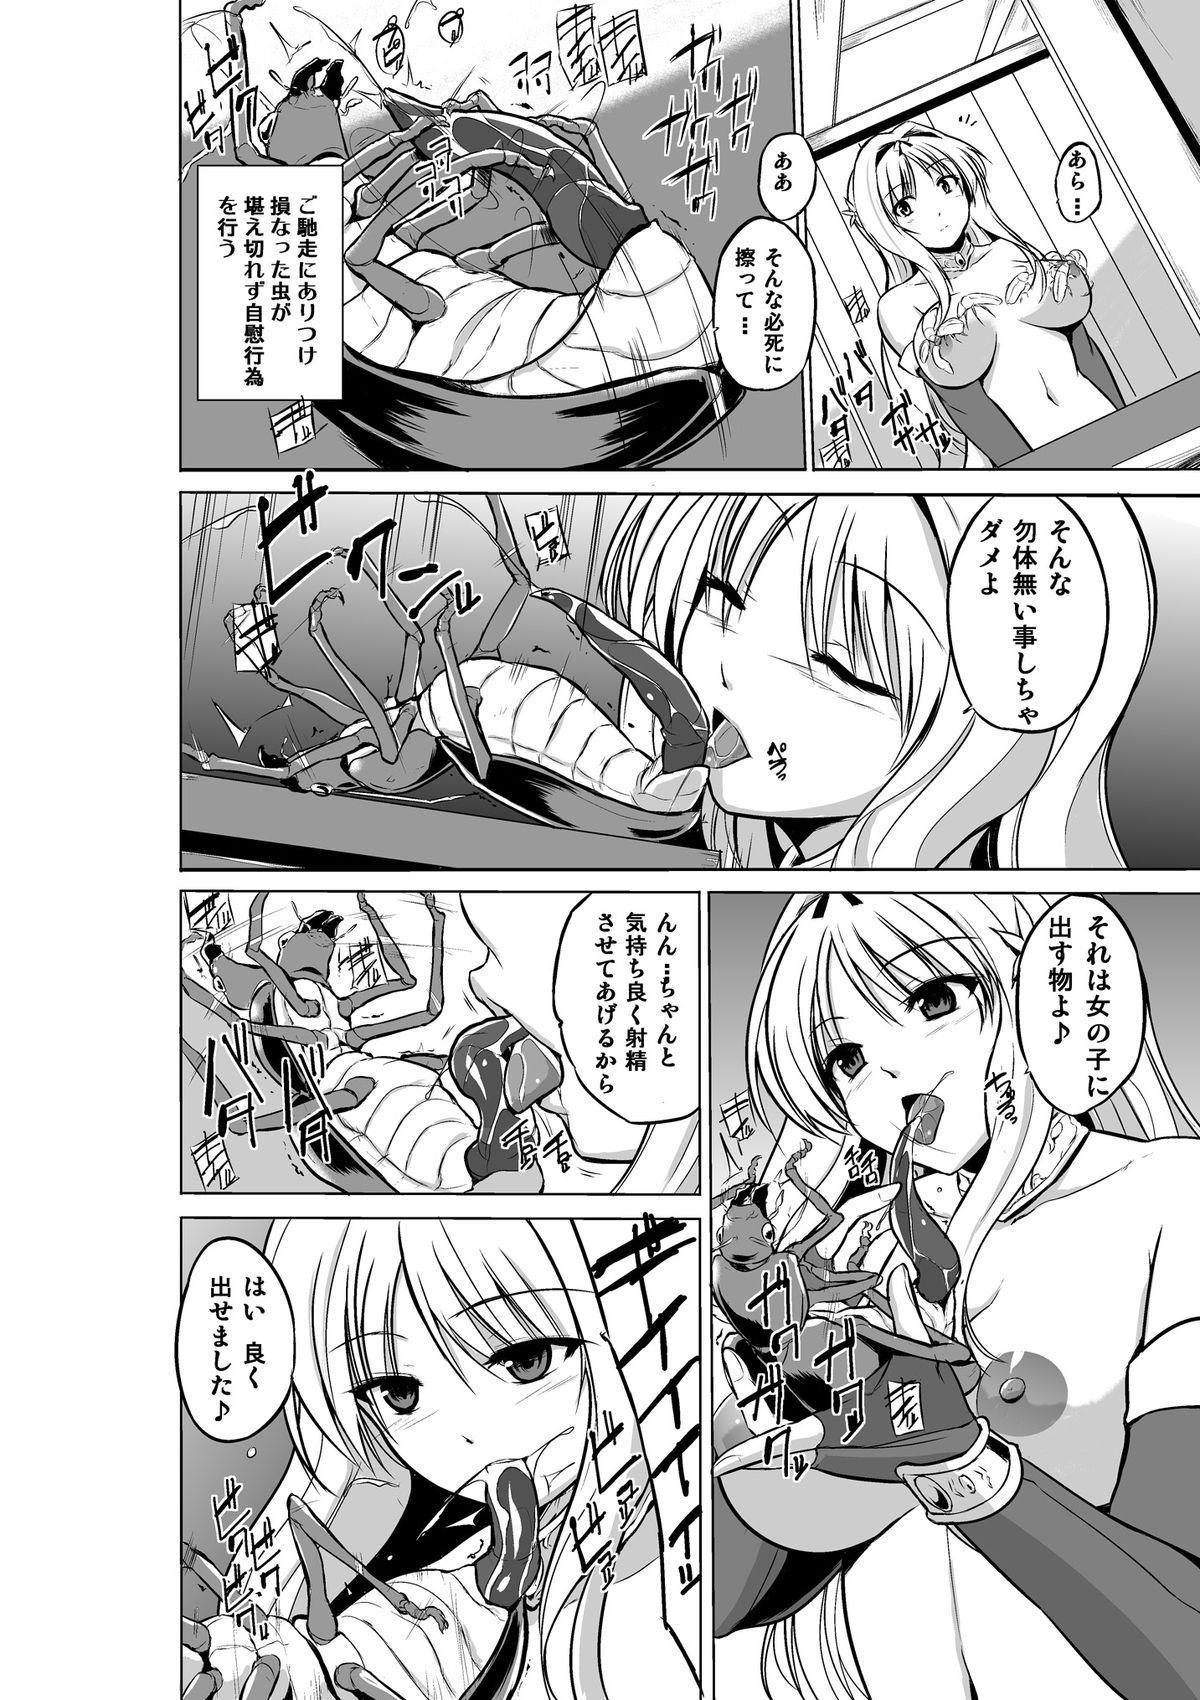 Longhair Dungeon Travelers - Futari no Himegoto - Toheart2 Party - Page 8